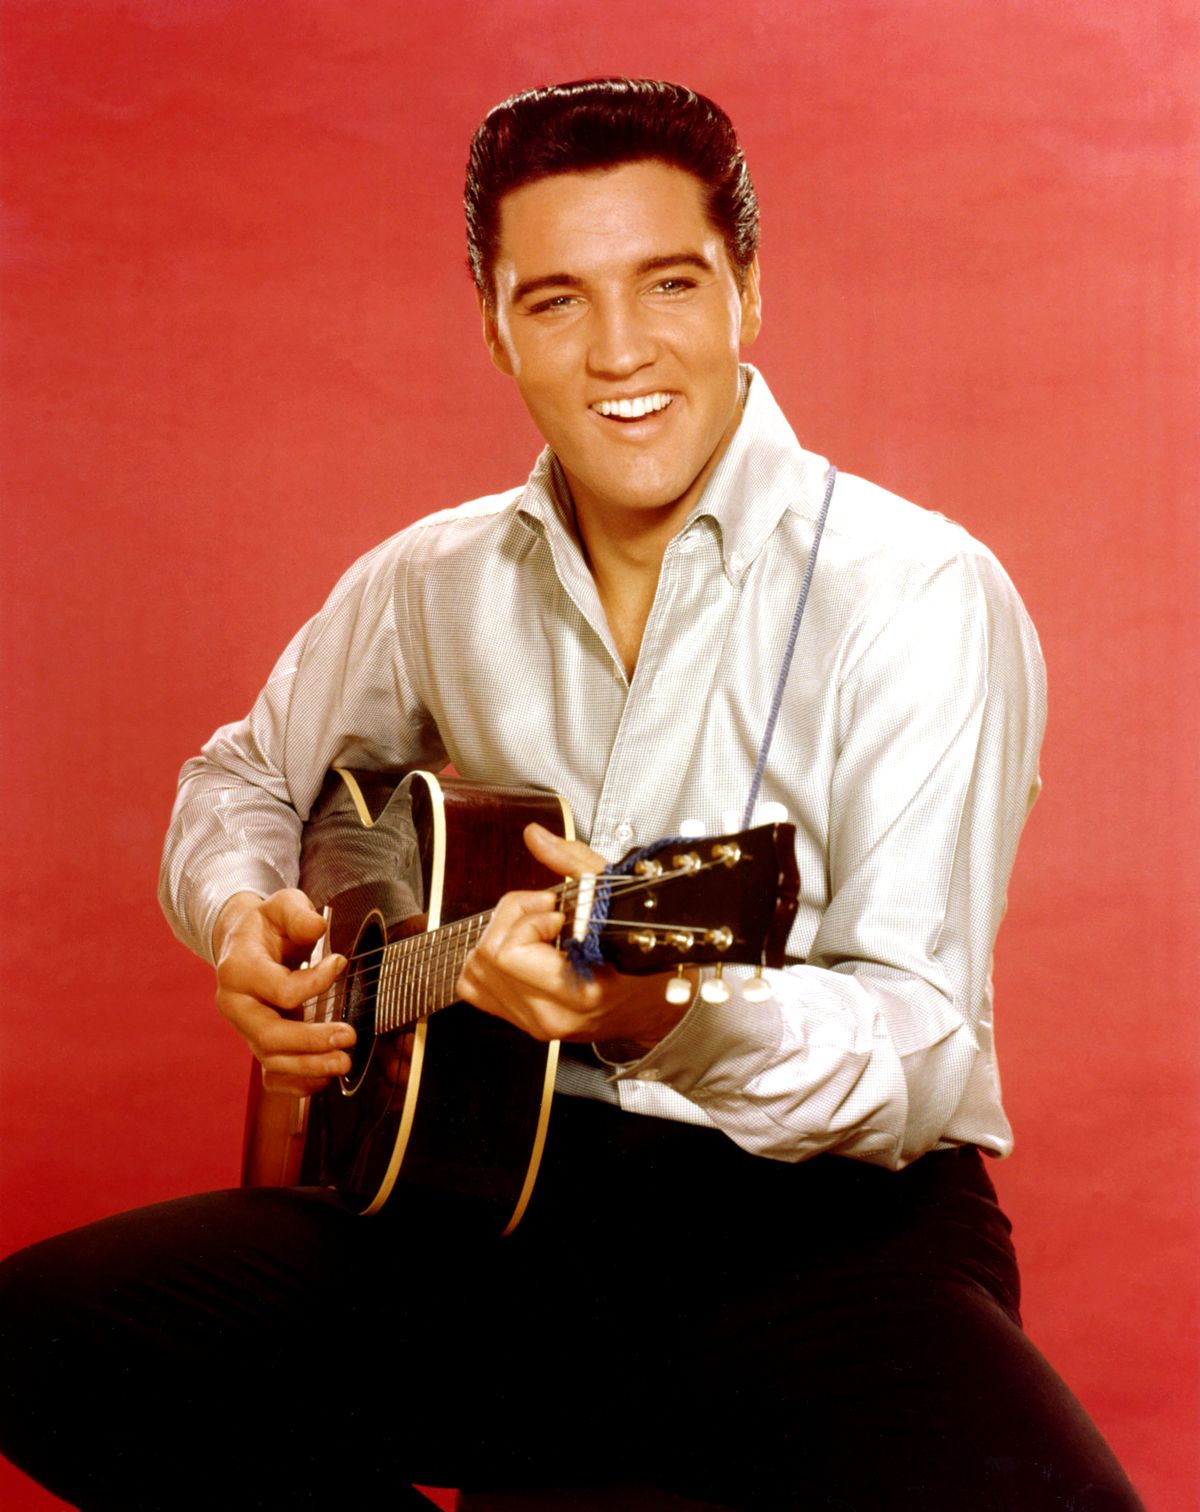 Rock and roll musician Elvis Presley strums an acoustic guitar